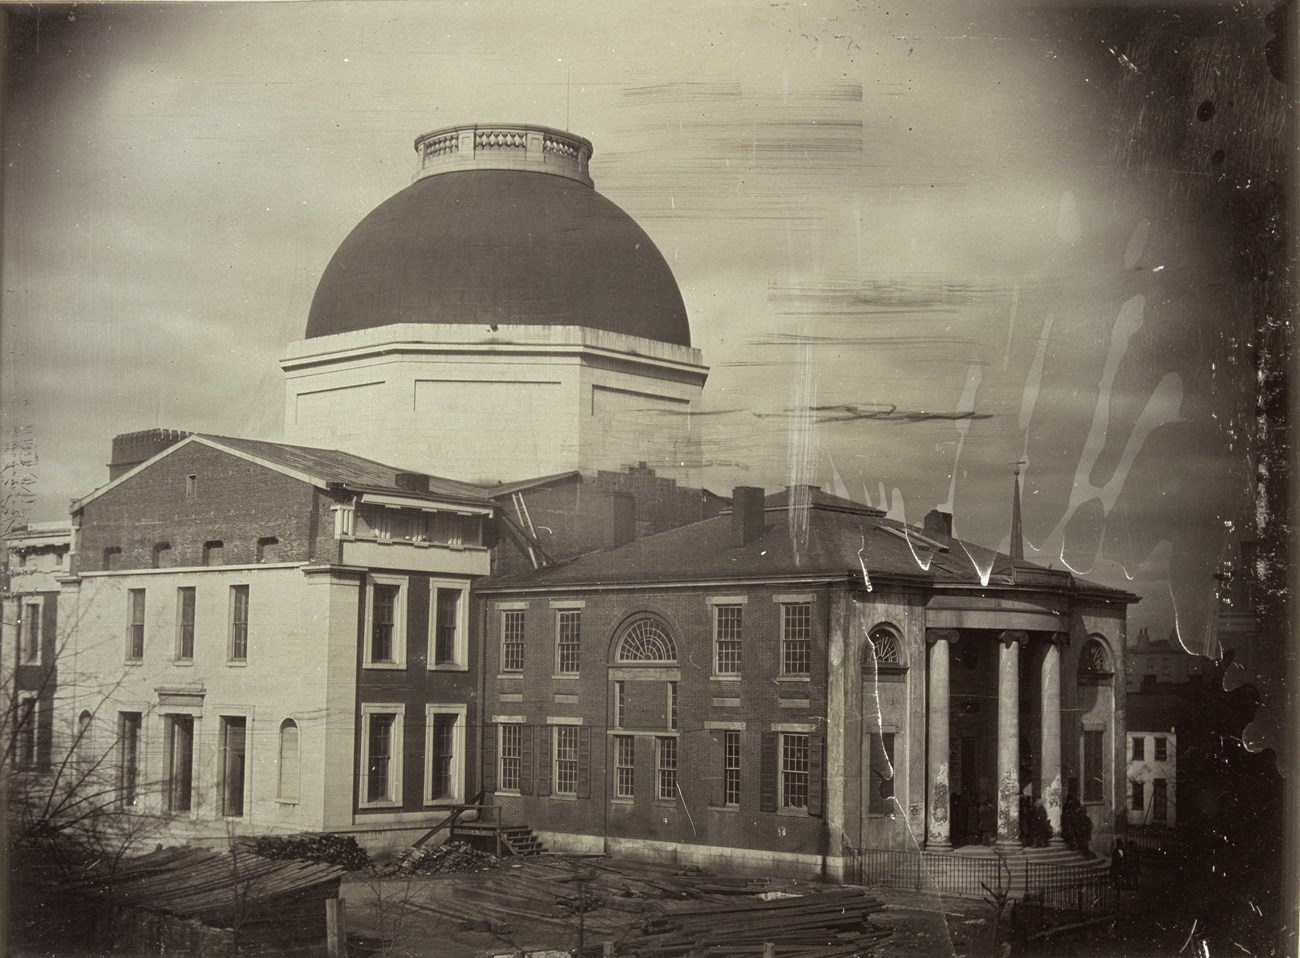 black and white photo of a courthouse under construction.